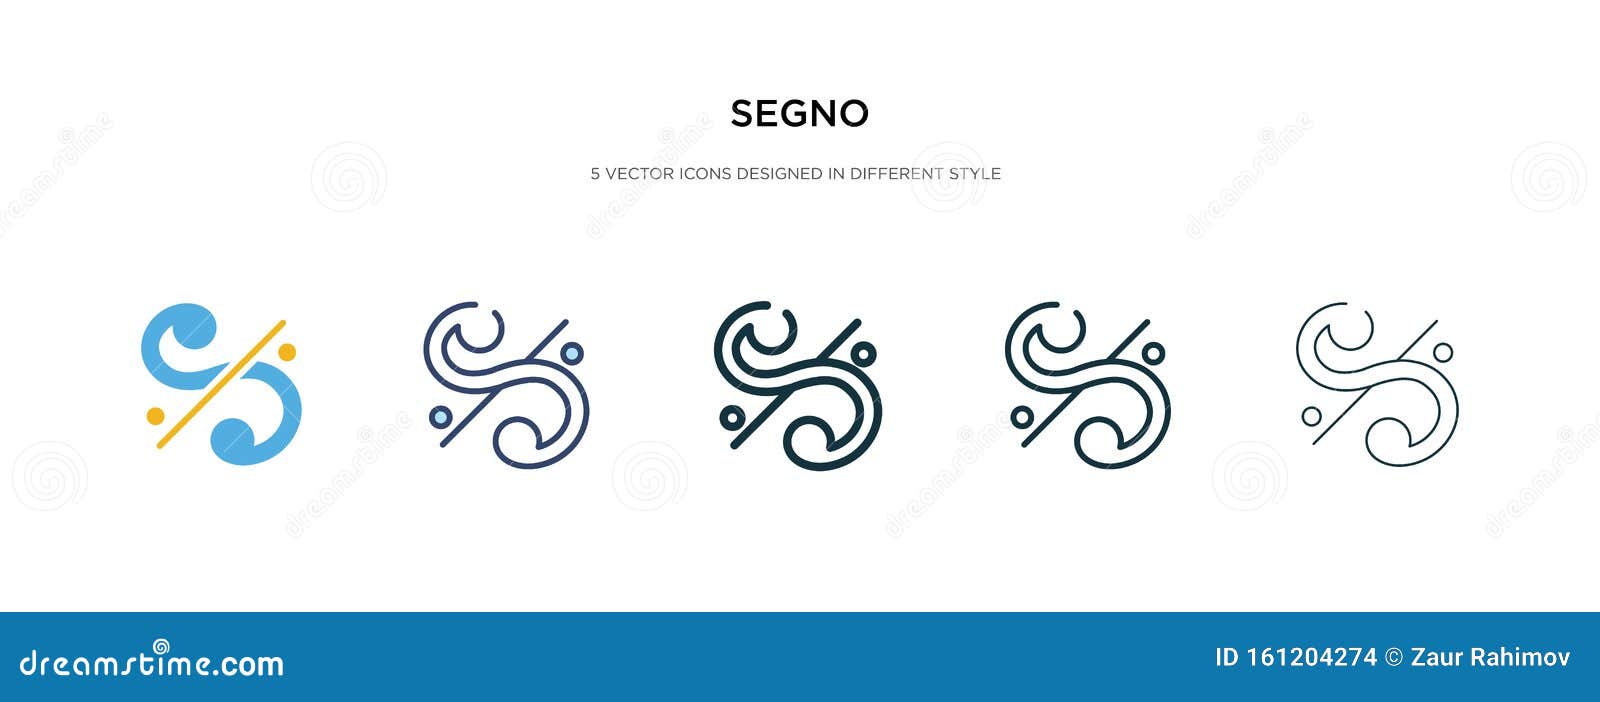 segno icon in different style  . two colored and black segno  icons ed in filled, outline, line and